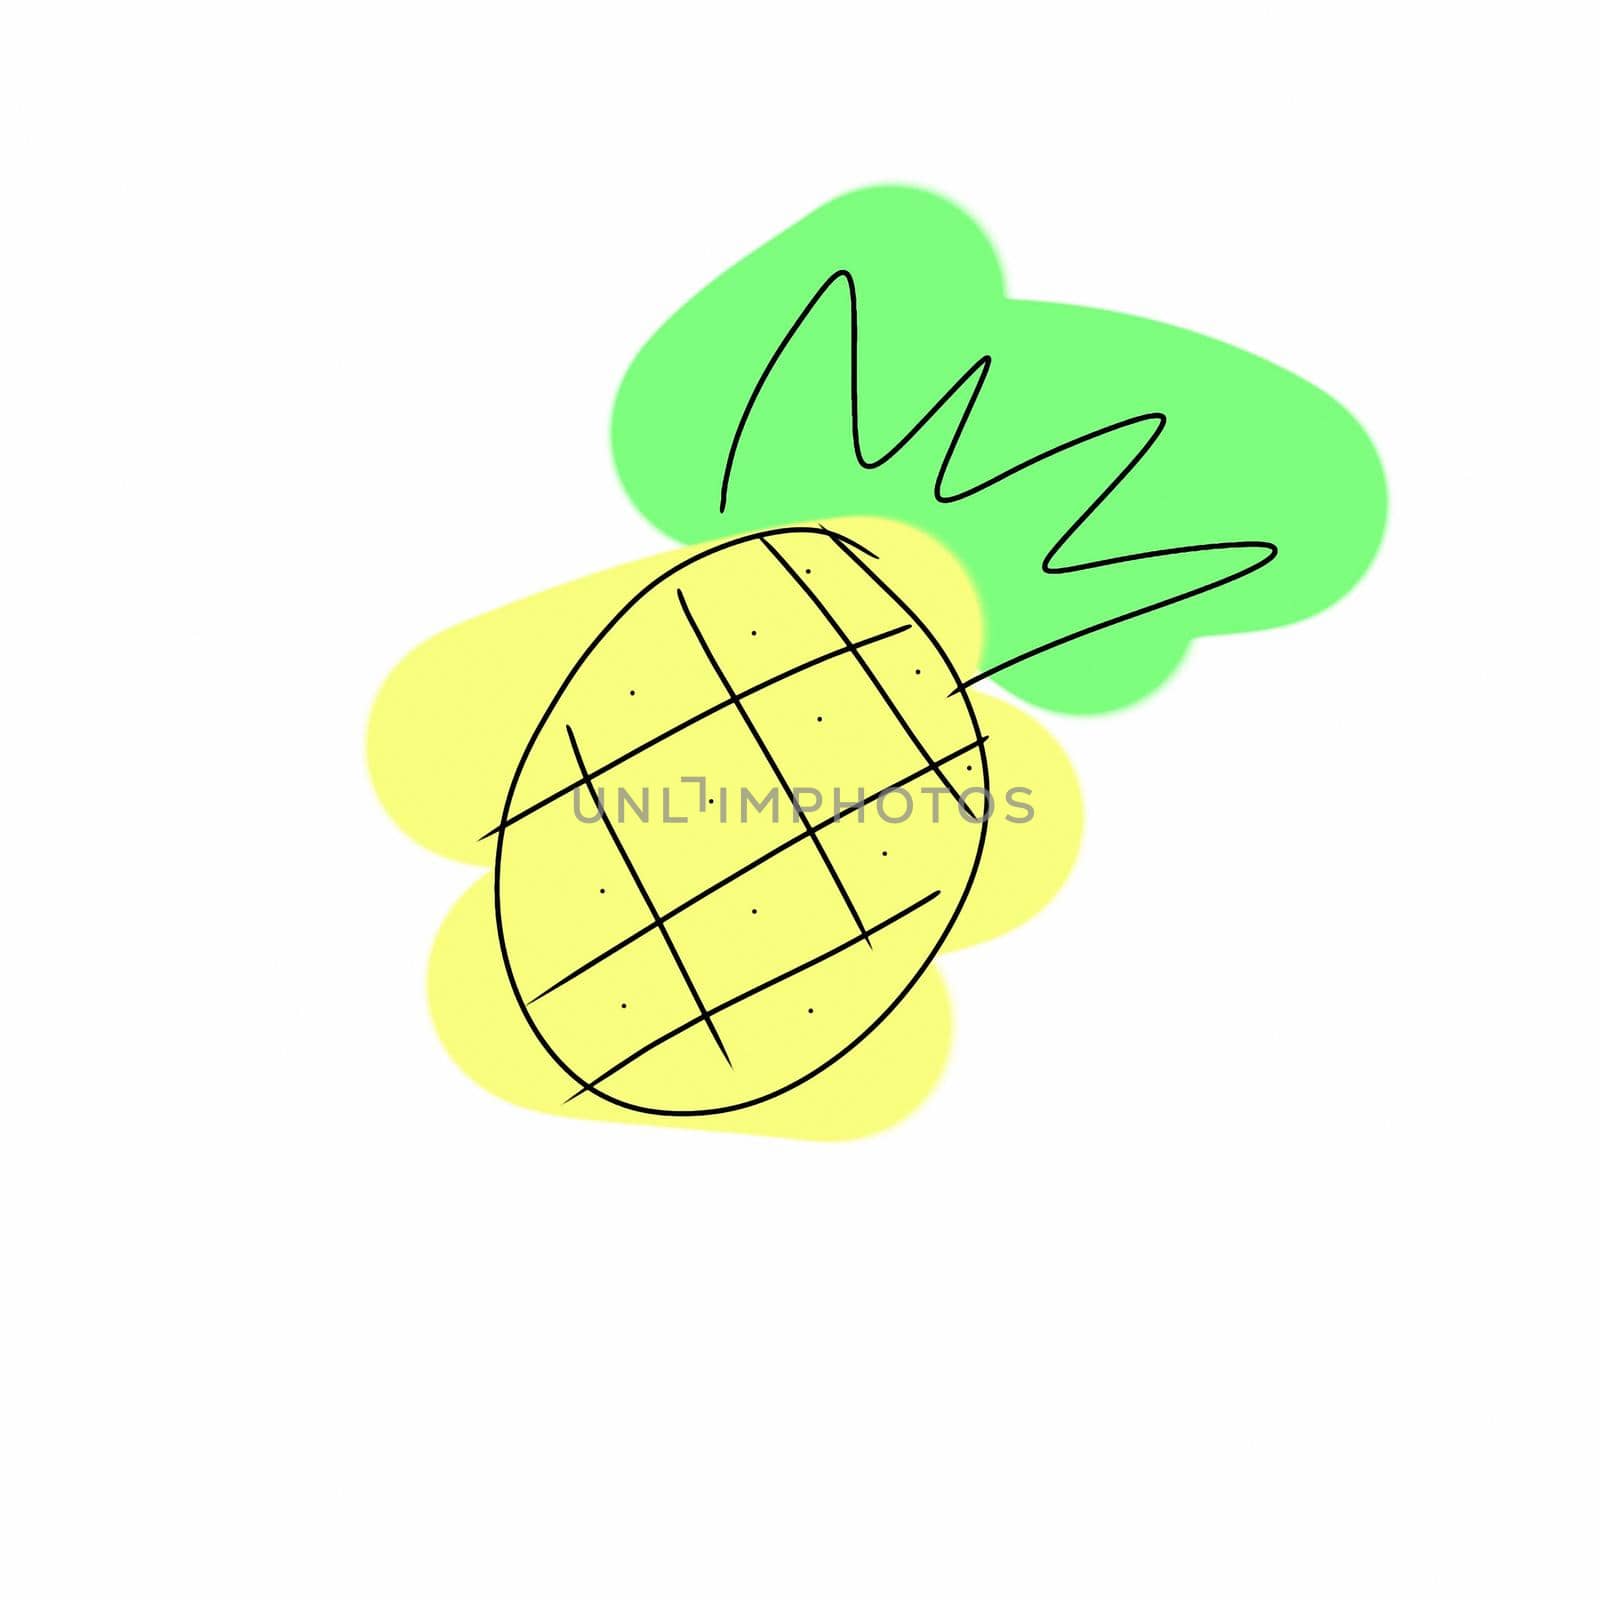 Pineapple. Illustration of pineapple fruit with isolated cartoon style on white. summer fruits, for a healthy and natural life